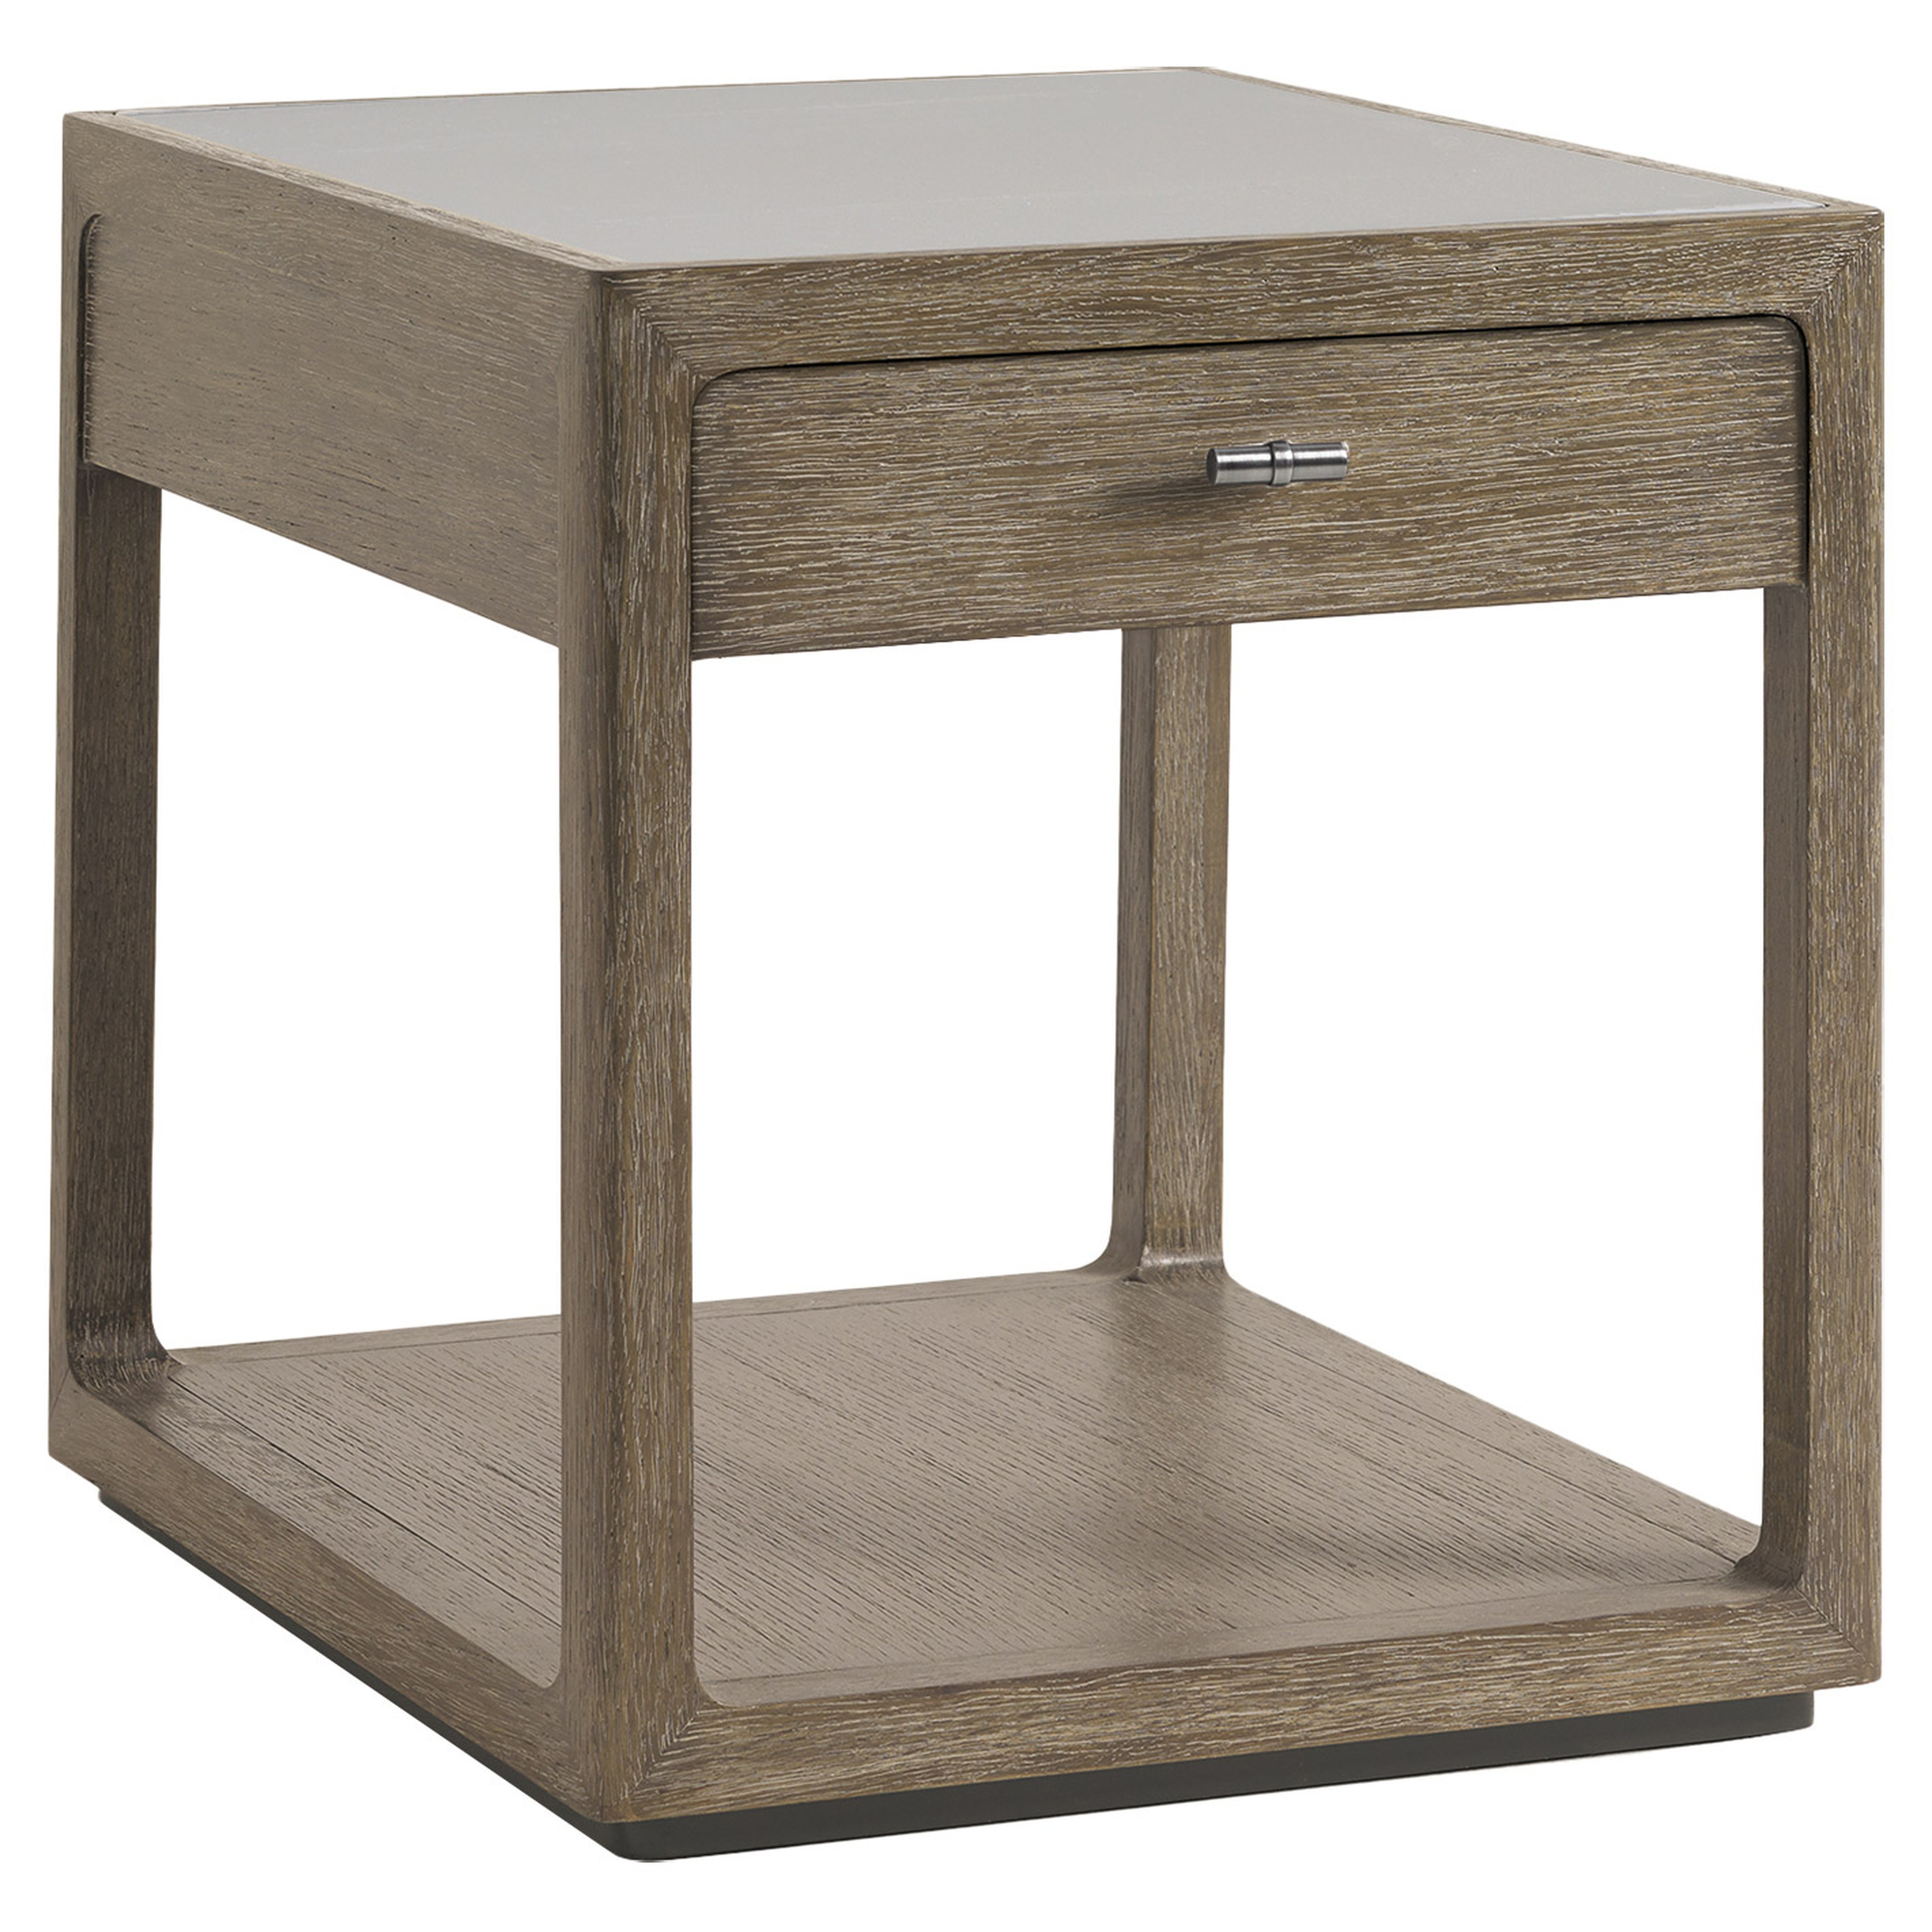 Eliza Rustic Lodge Brown Oak Wood Side End Table - Kathy Kuo Home